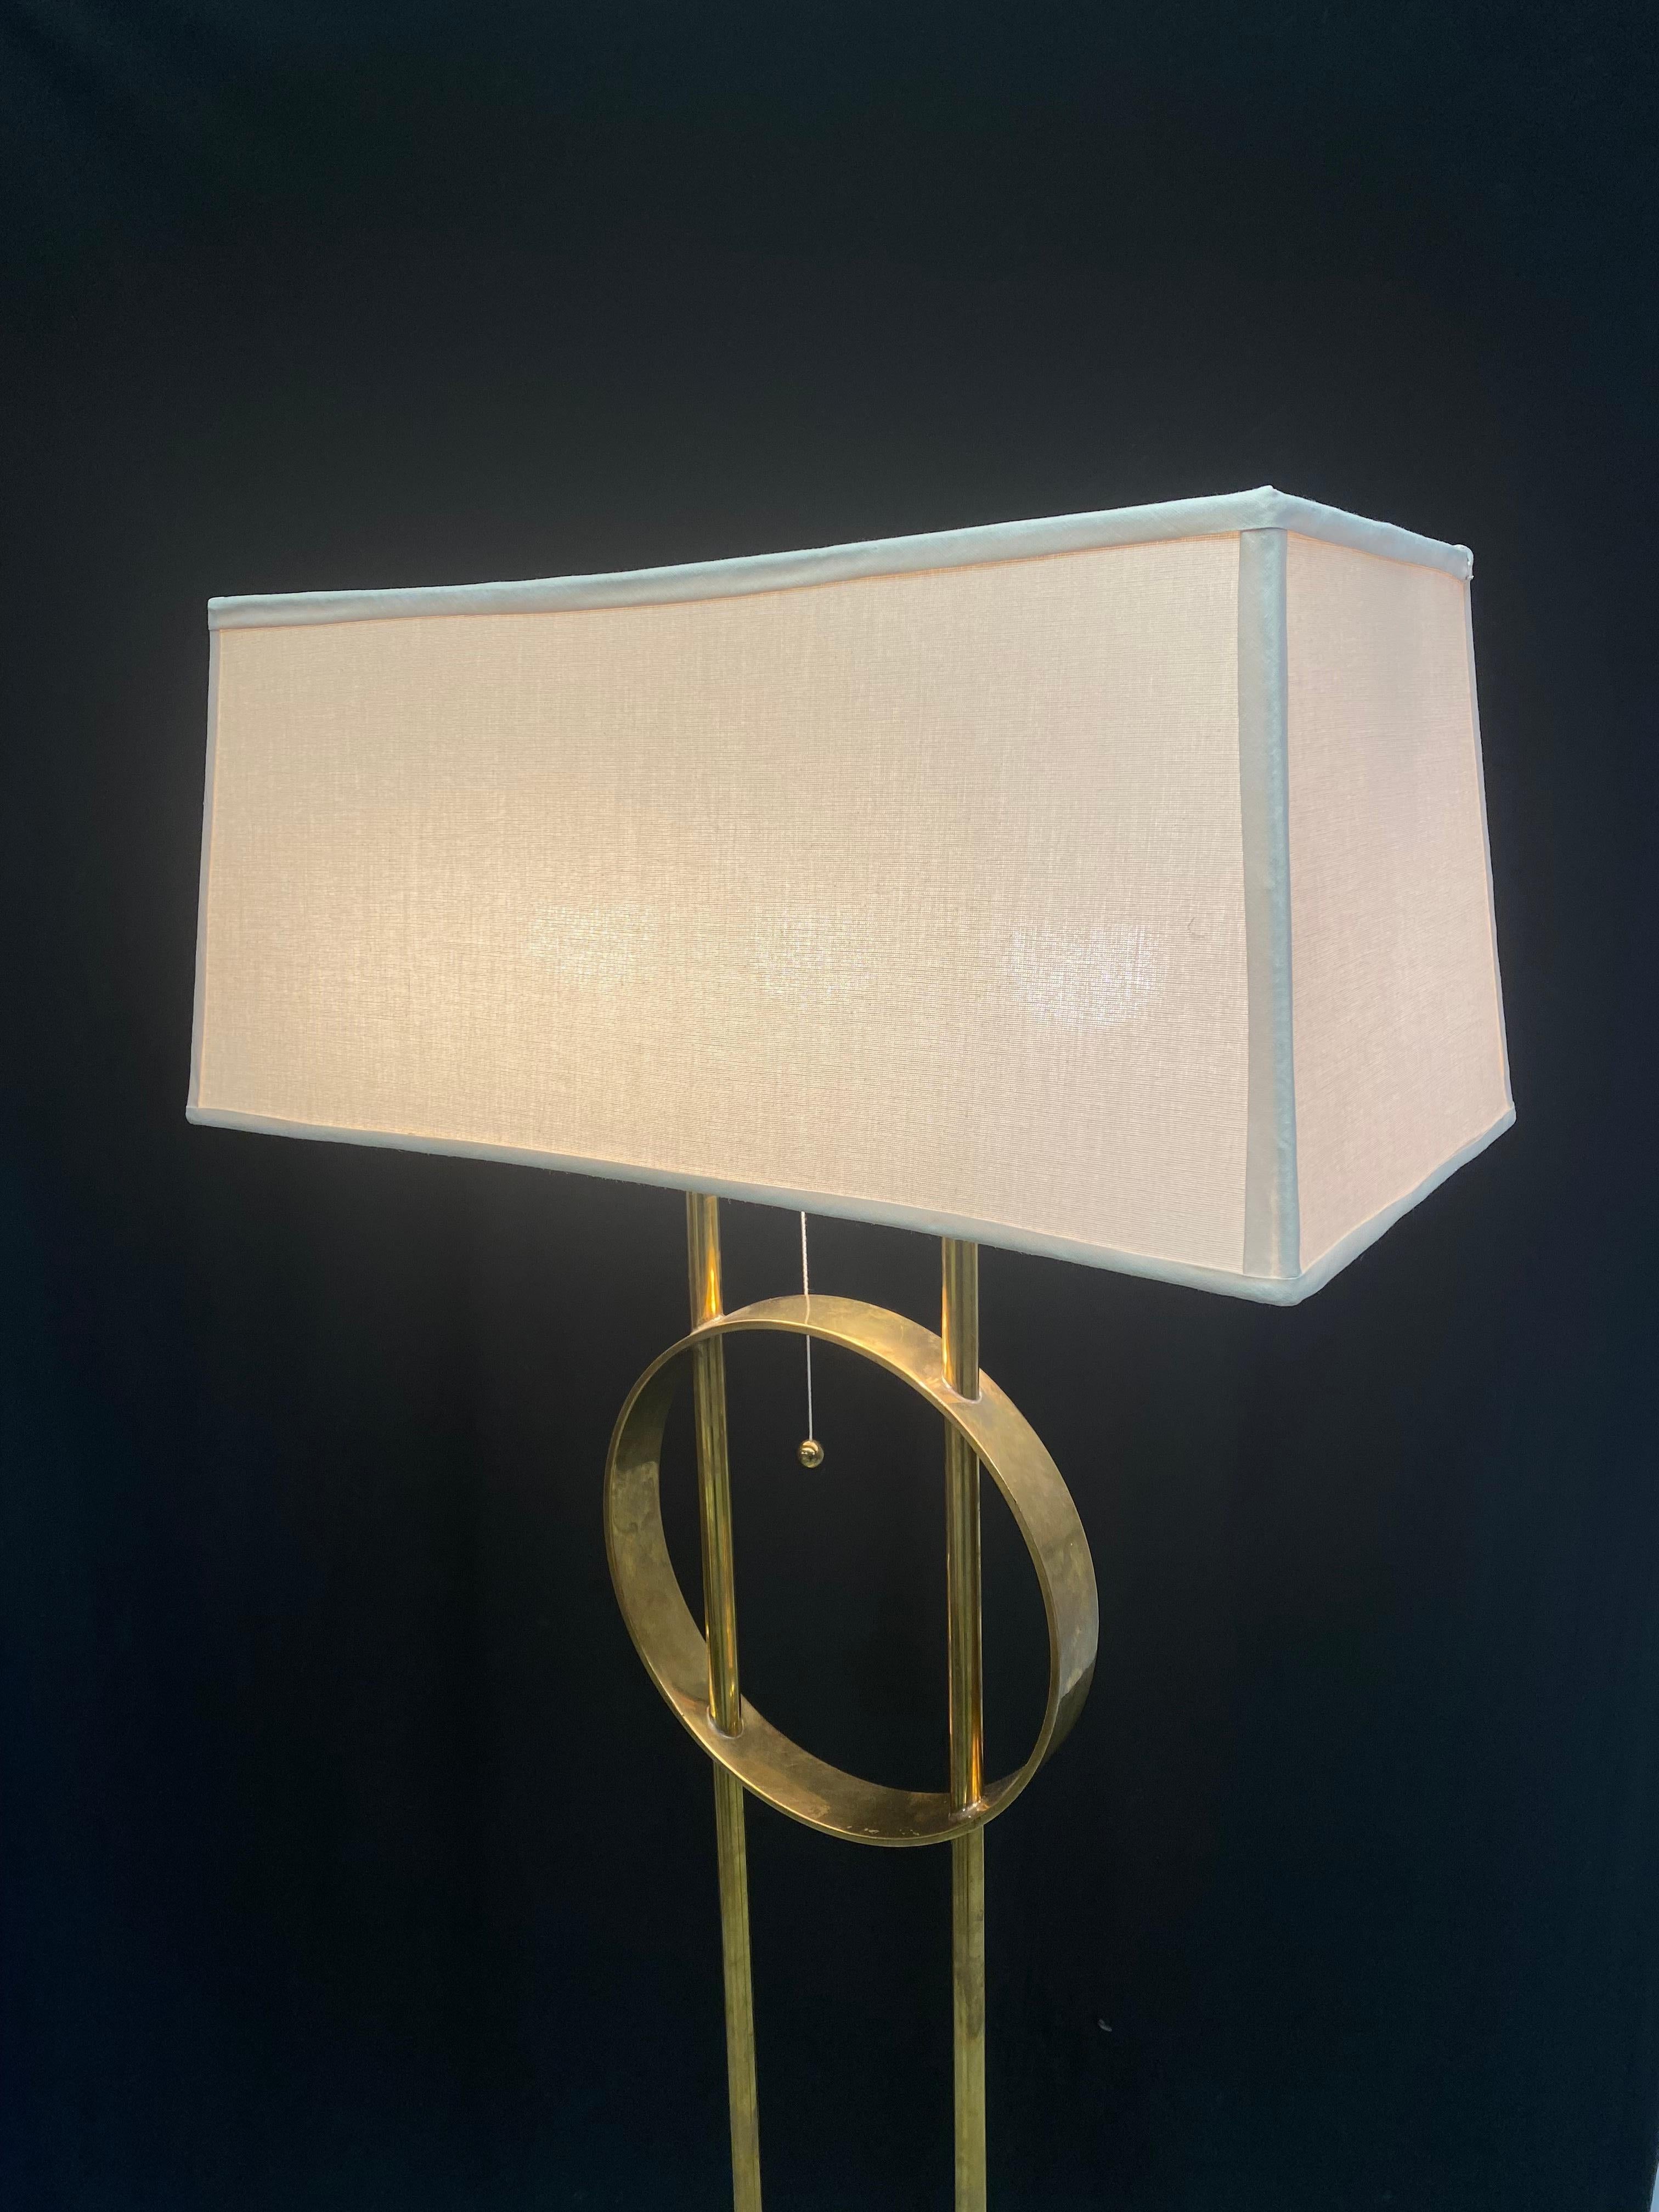 A beautiful Tynell floor lamp commissioned for the HOK Suurravintola 